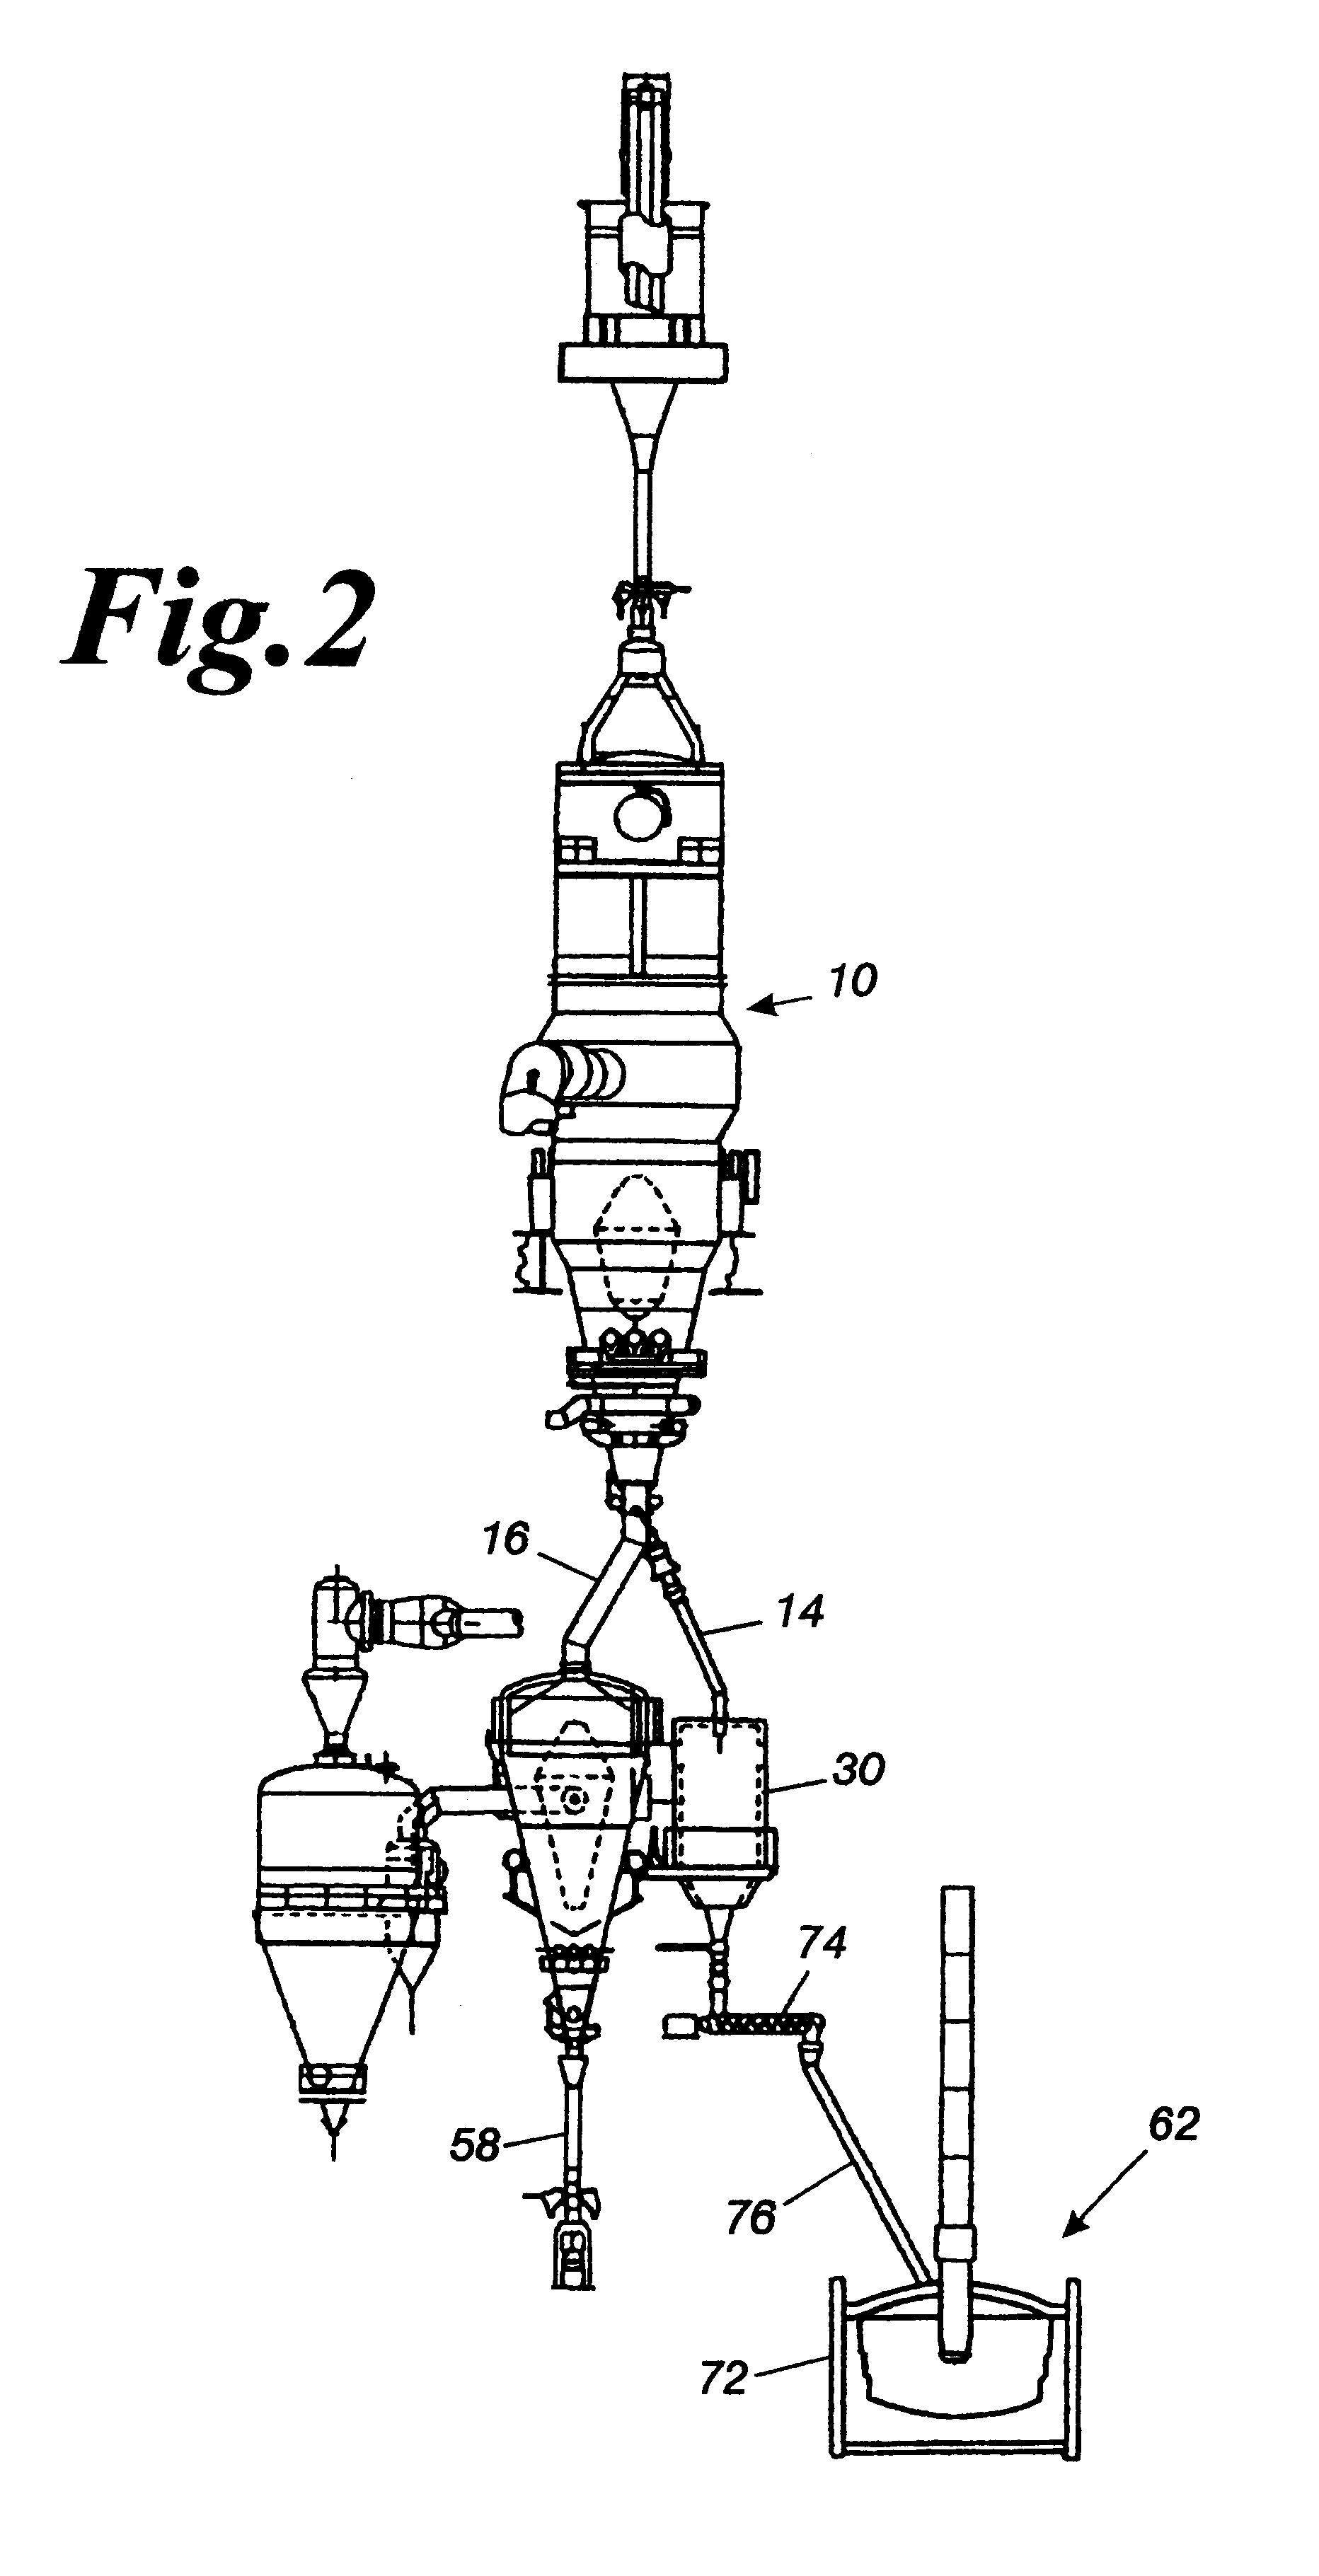 Direct reduced iron discharge system and method